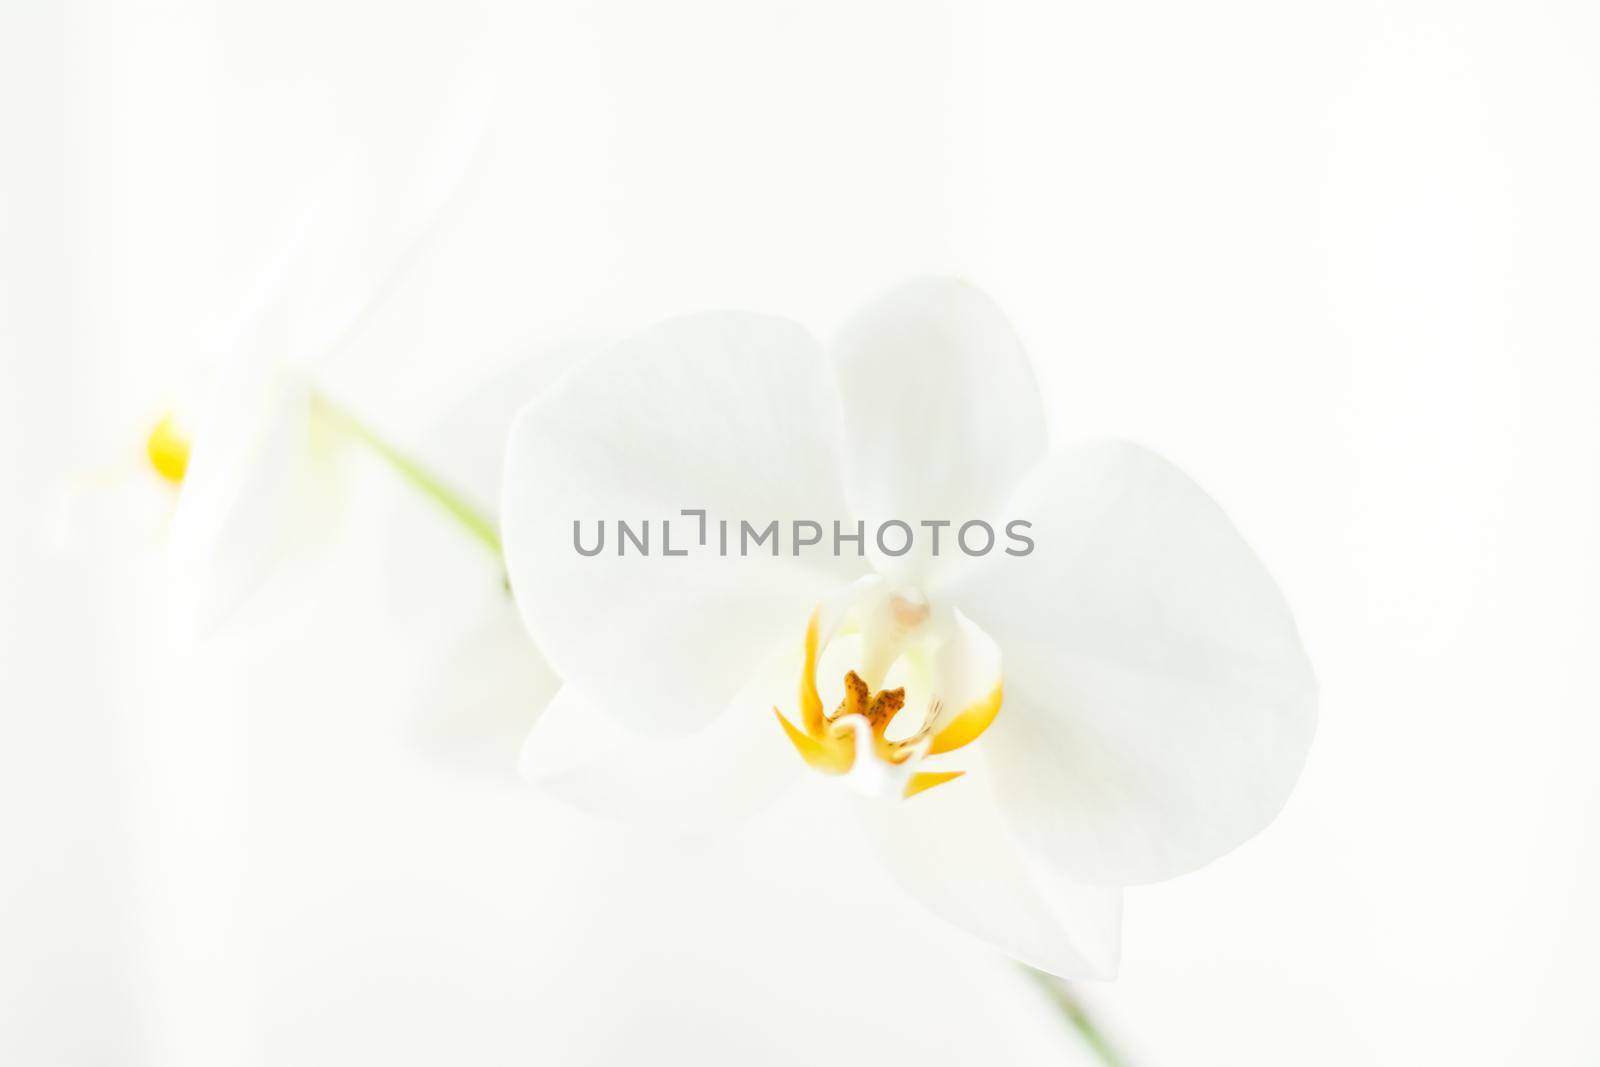 Blooming, branding and botanical concept - White orchid flower in bloom, abstract floral blossom art background and flowers in nature for wedding invitation and luxury beauty brand holiday design